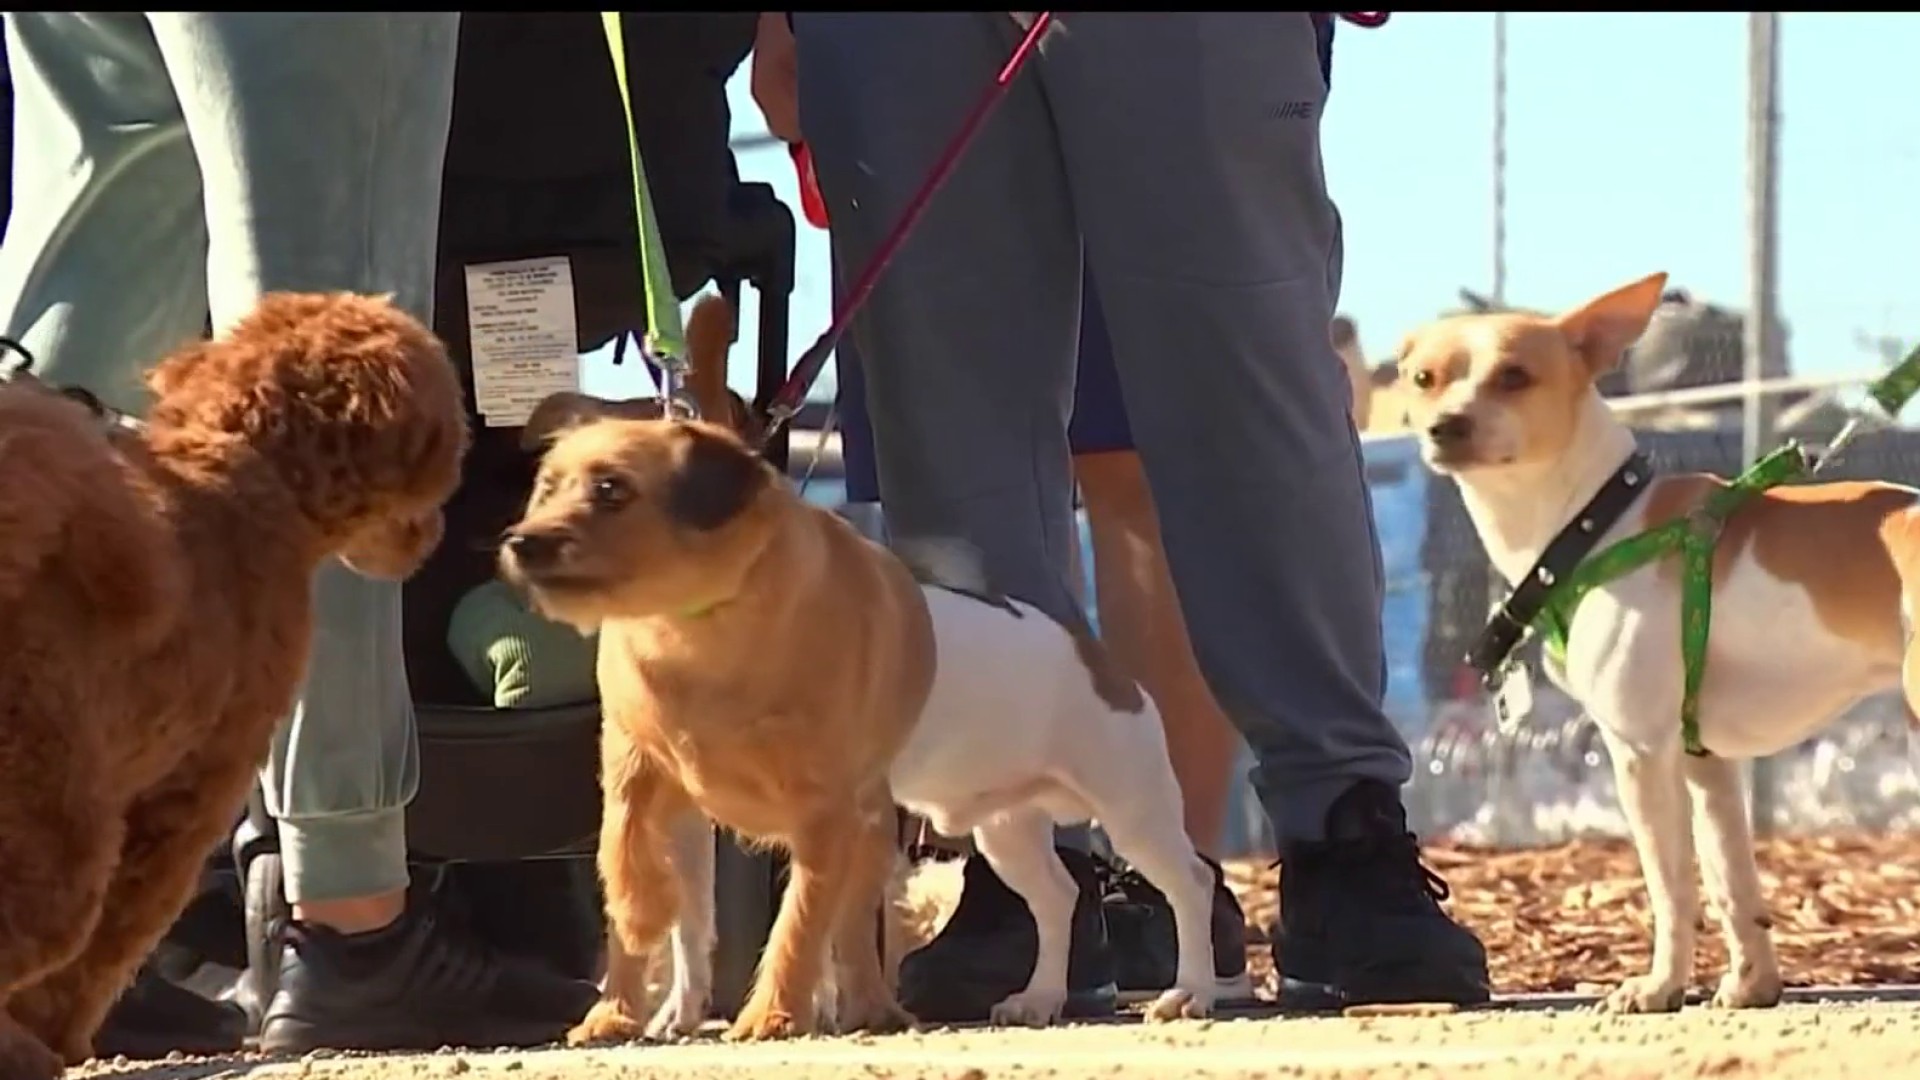 South LA Celebrates Opening of Its First Dog Park